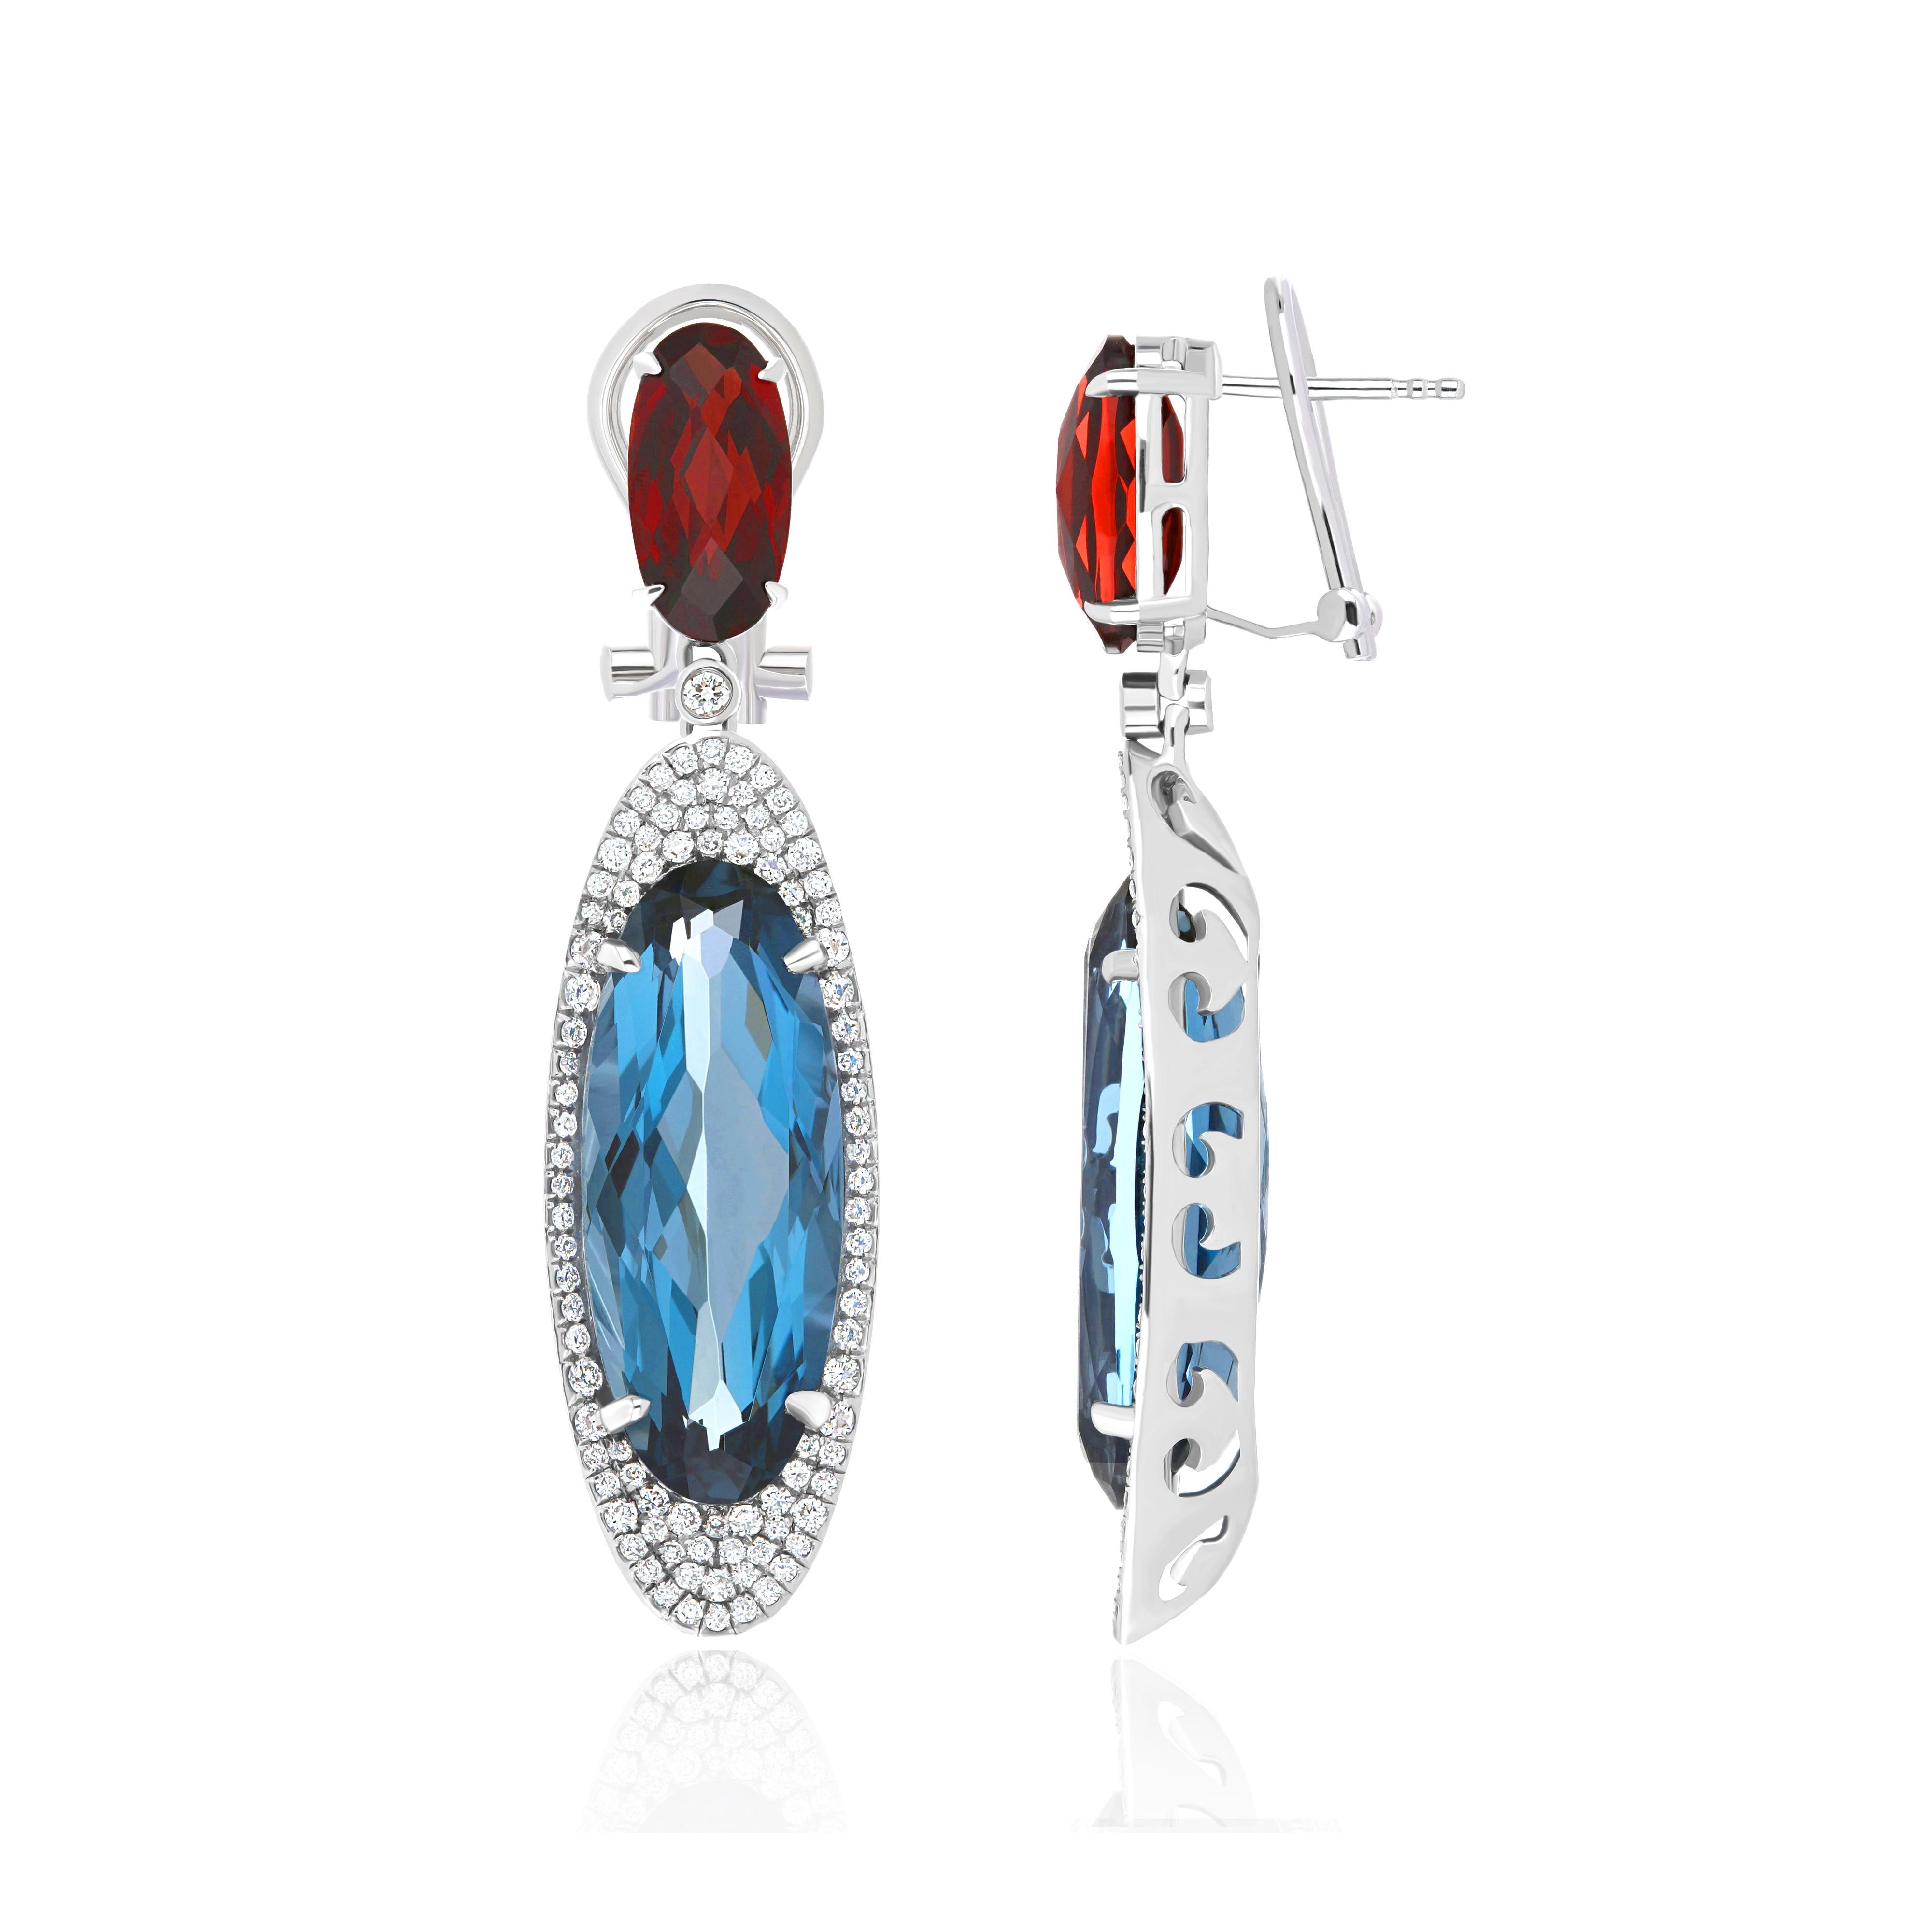 Elegant and exquisitely detailed Cocktail 14 Karat White Gold Earring, center set with 13.90Cts. (approx.) Fancy Elongated Oval Shape London Blue Topaz, accented with Elongated Oval Garnet 3.32Cts (approx.) Surrounded with micro pave Diamonds,